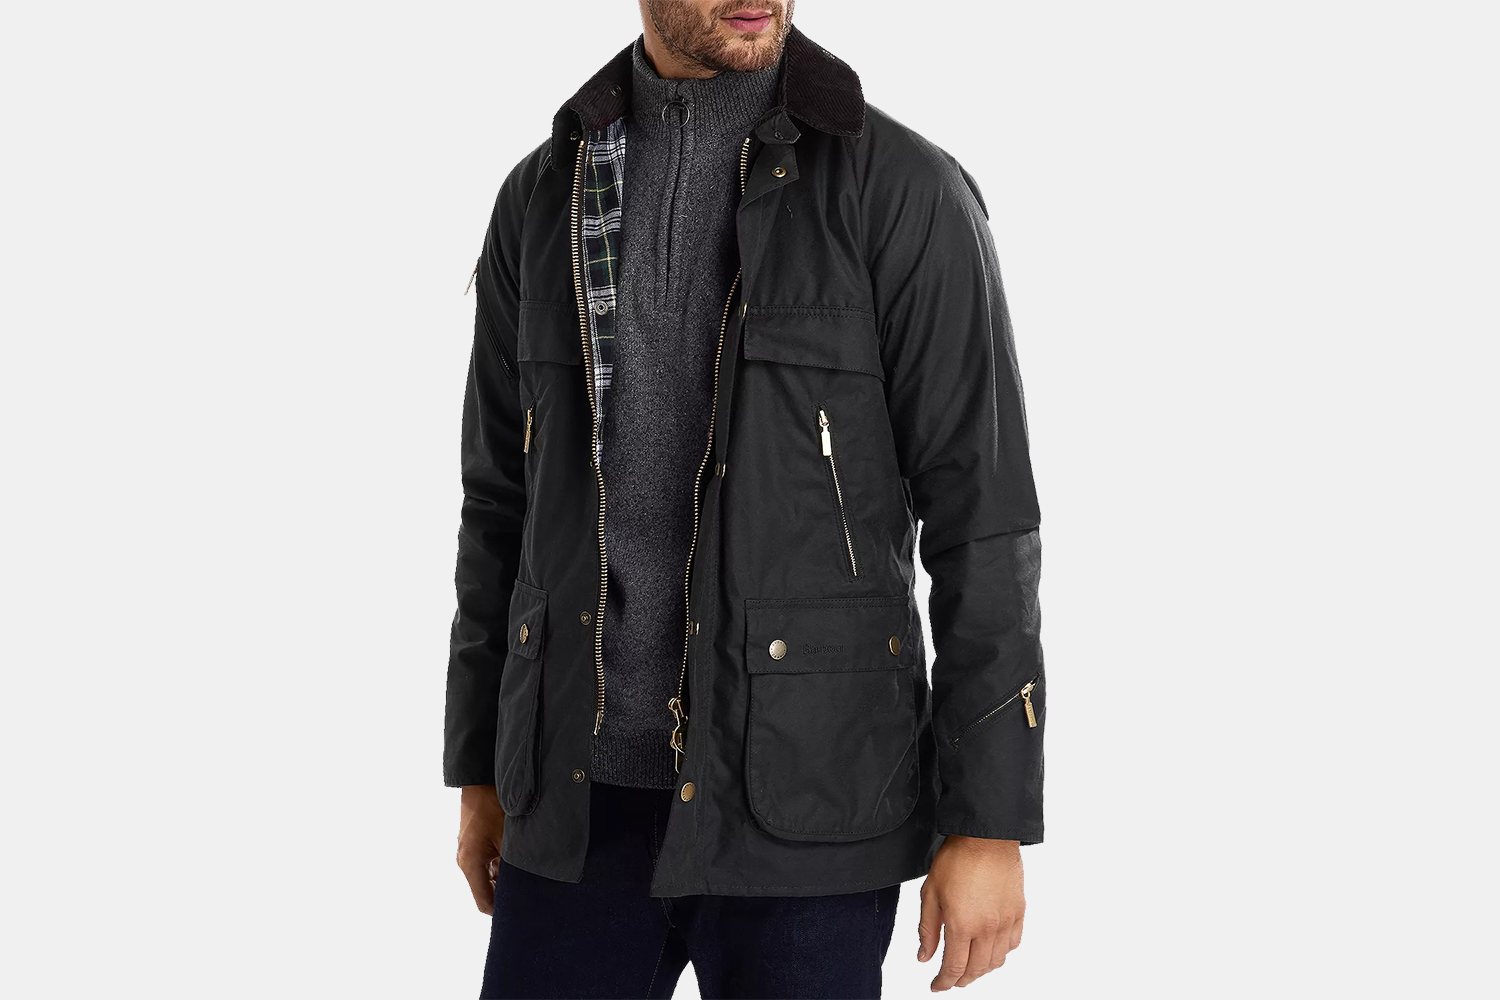 Men's Barbour Icons Bedale Waxed Jacket